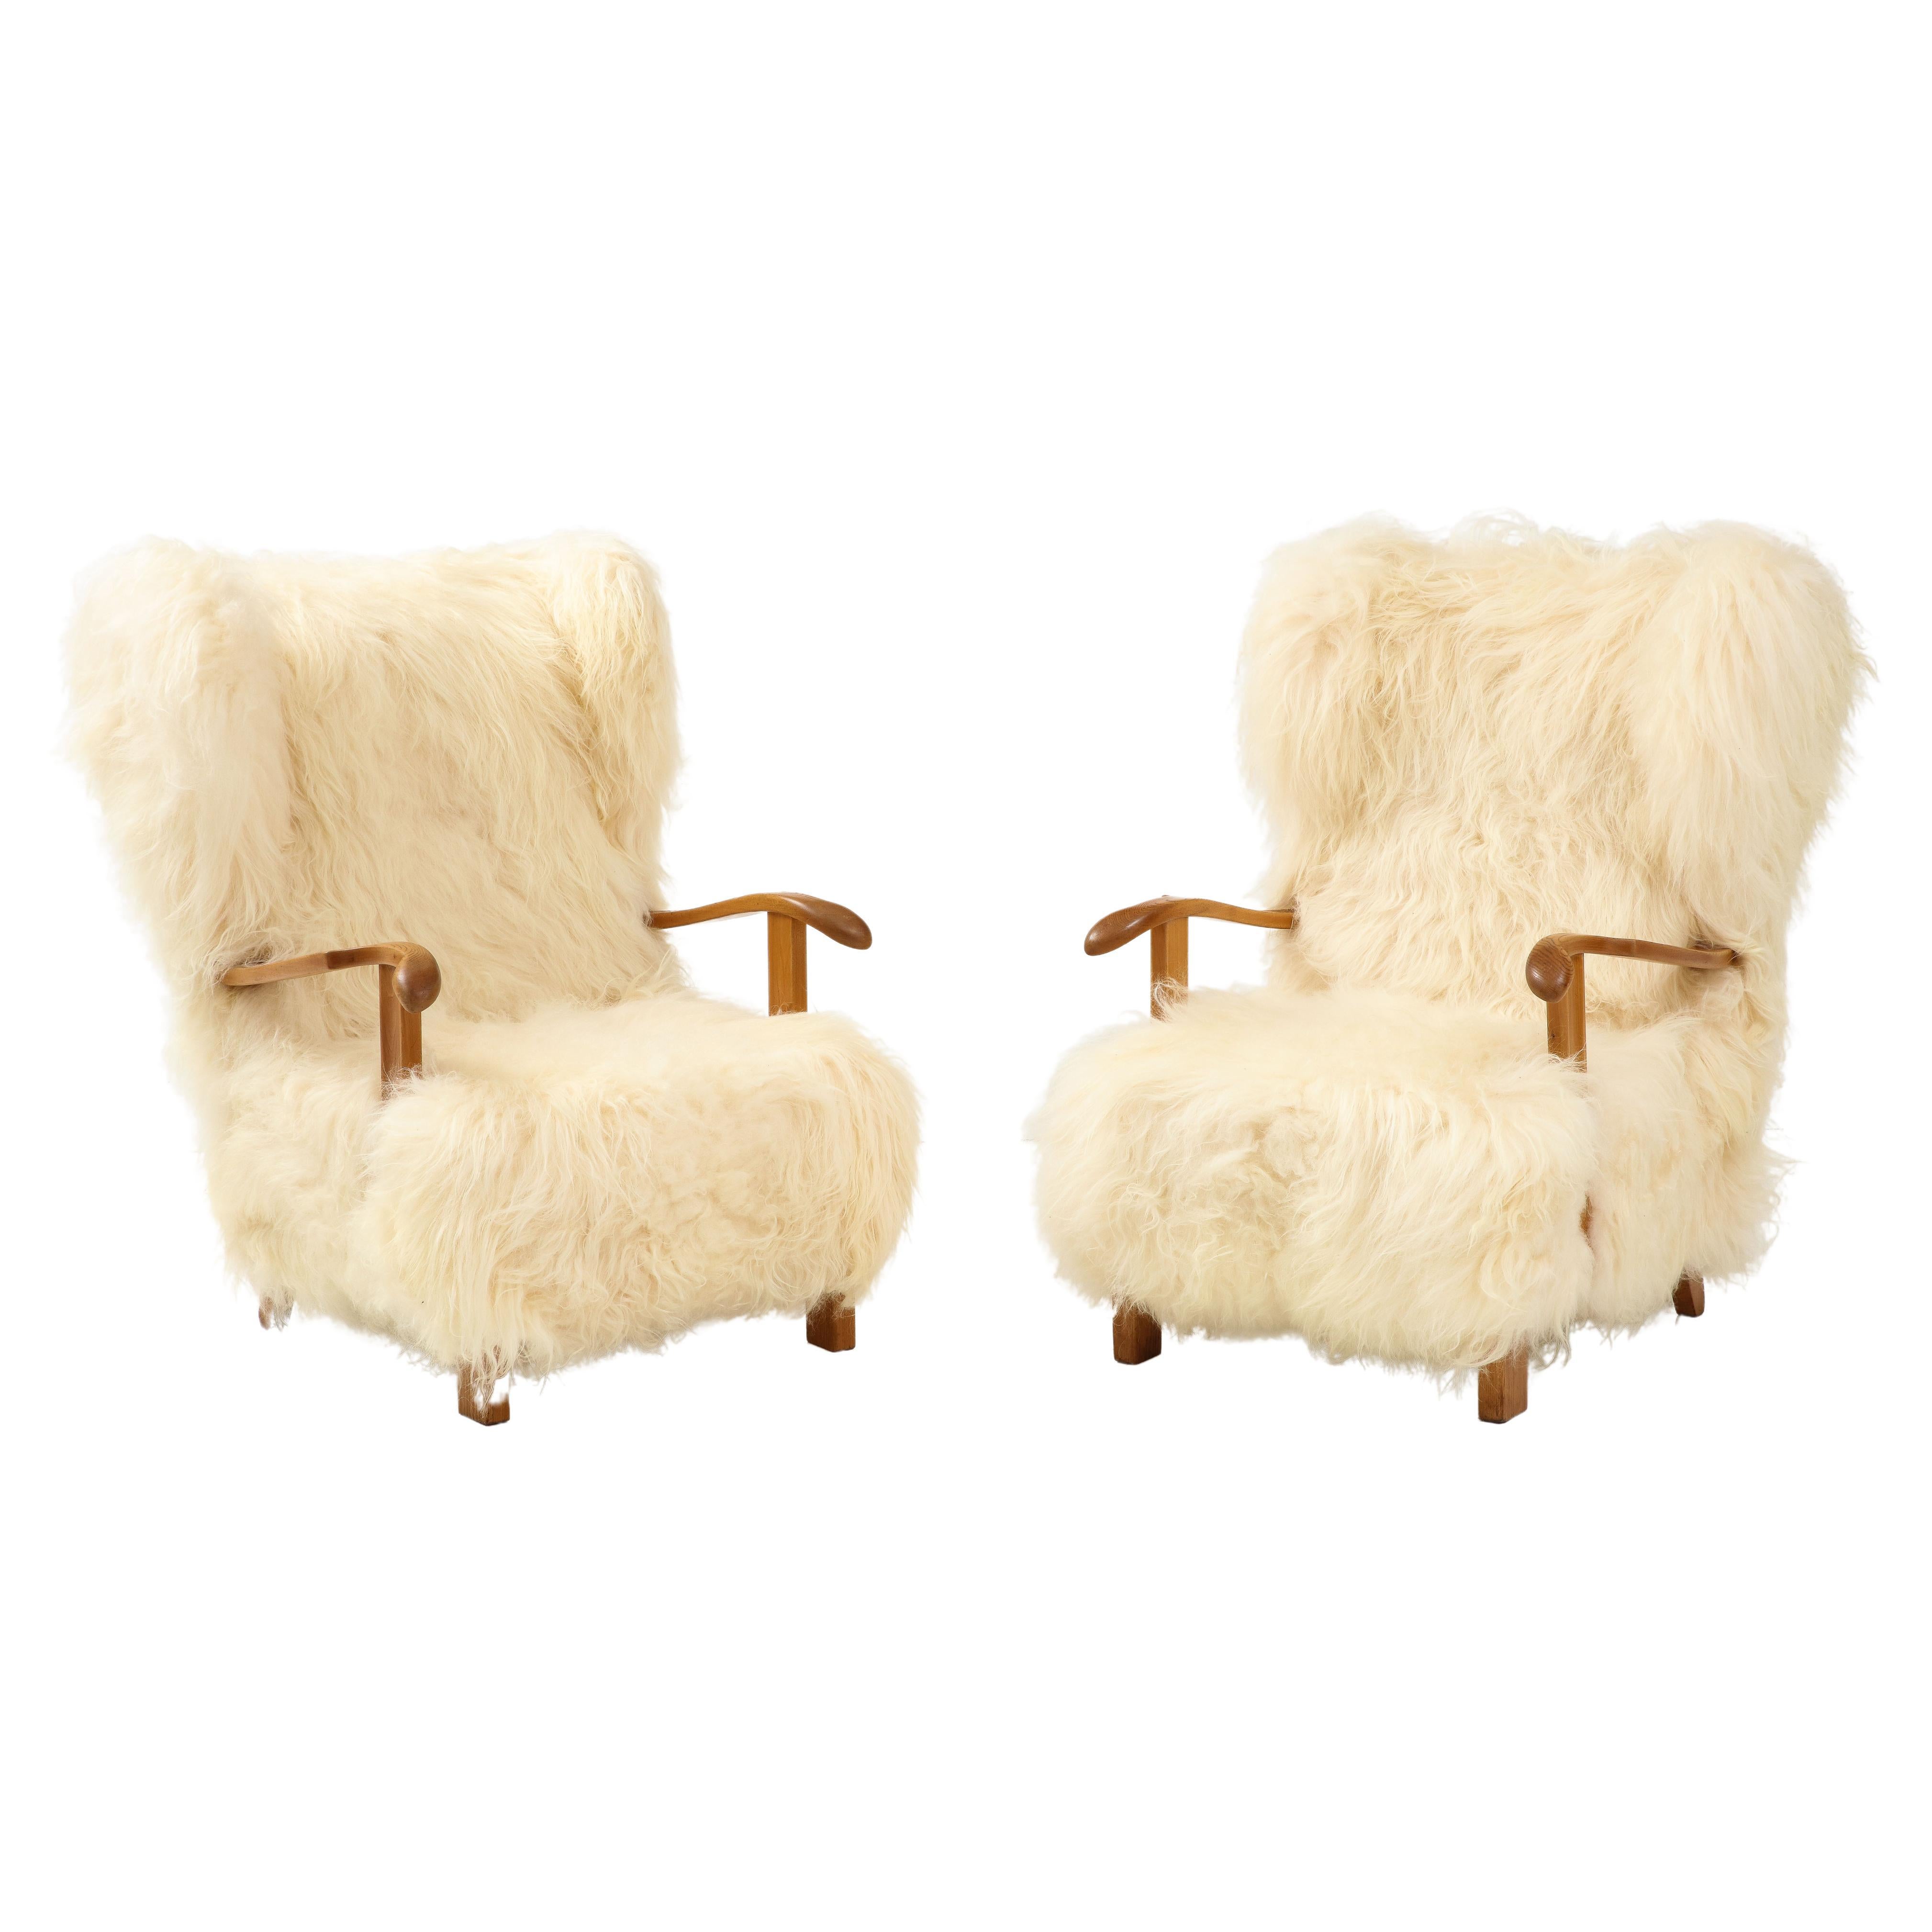 Fritz Hansen Rare Pair of Wingback Lounge Chairs Model 1582 in Sheepskin, 1930s